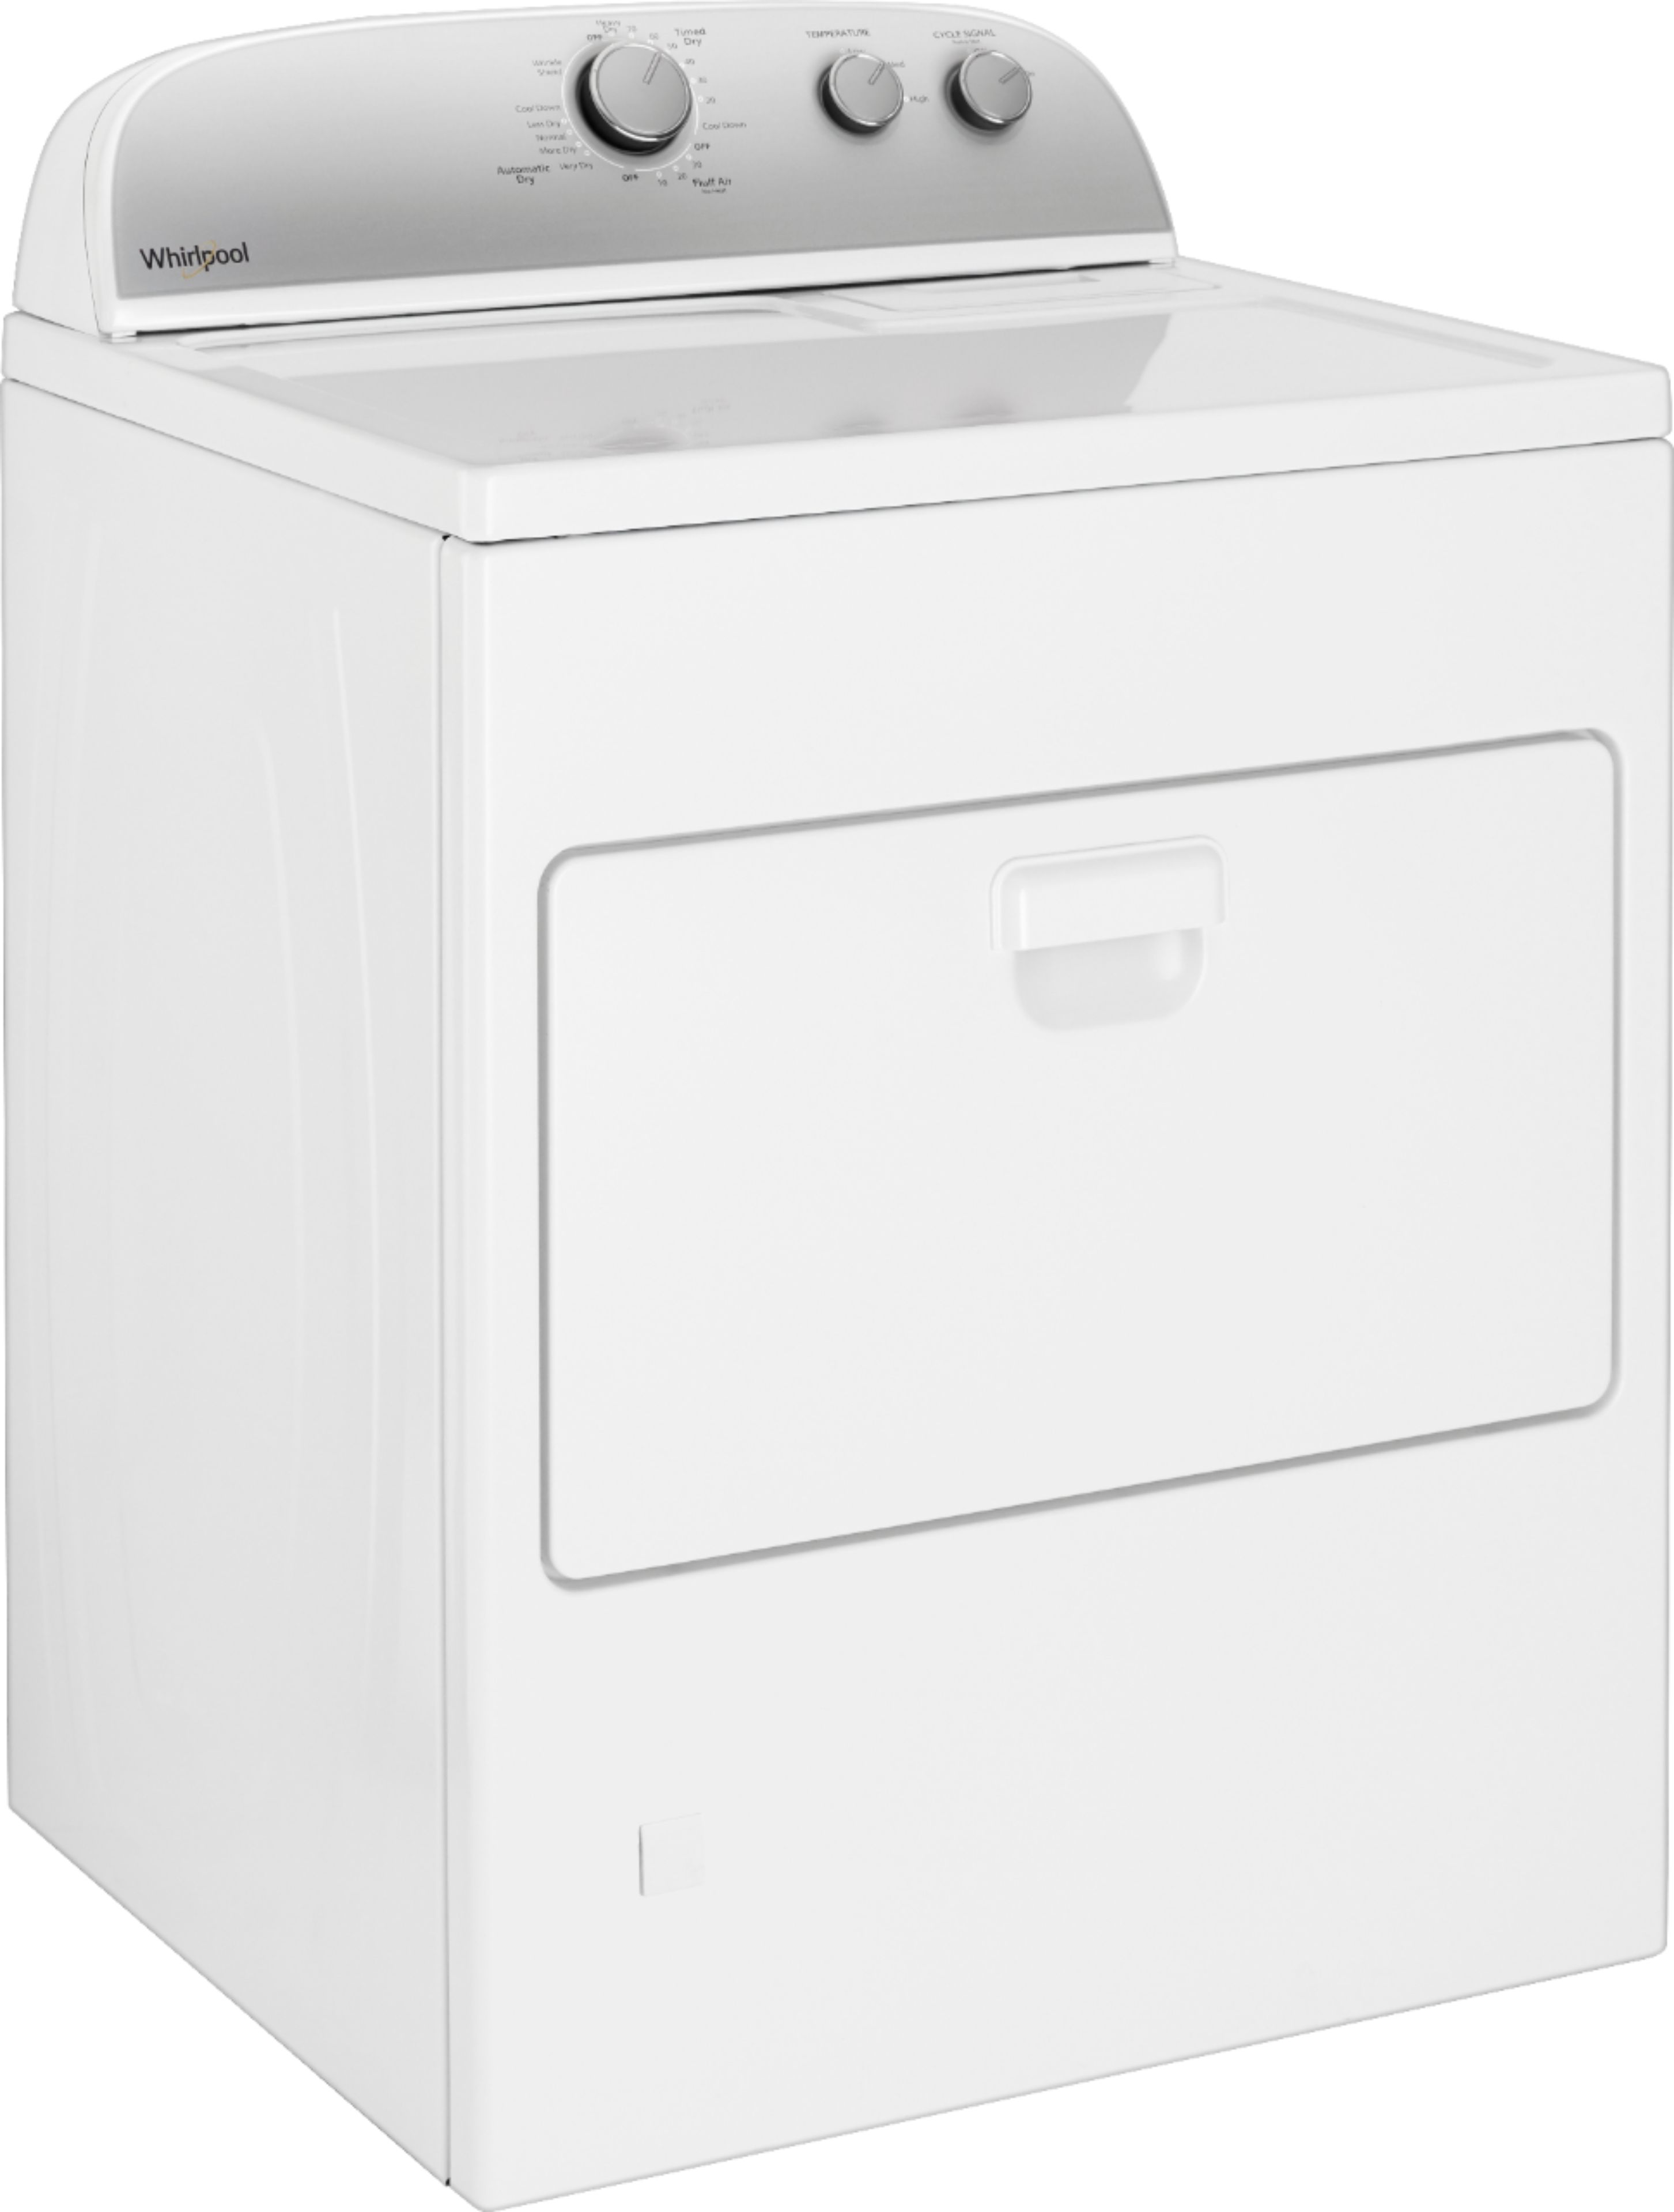 Angle View: GE - 7.5 Cu. Ft. 13-Cycle Electric Dryer with Steam - White On White